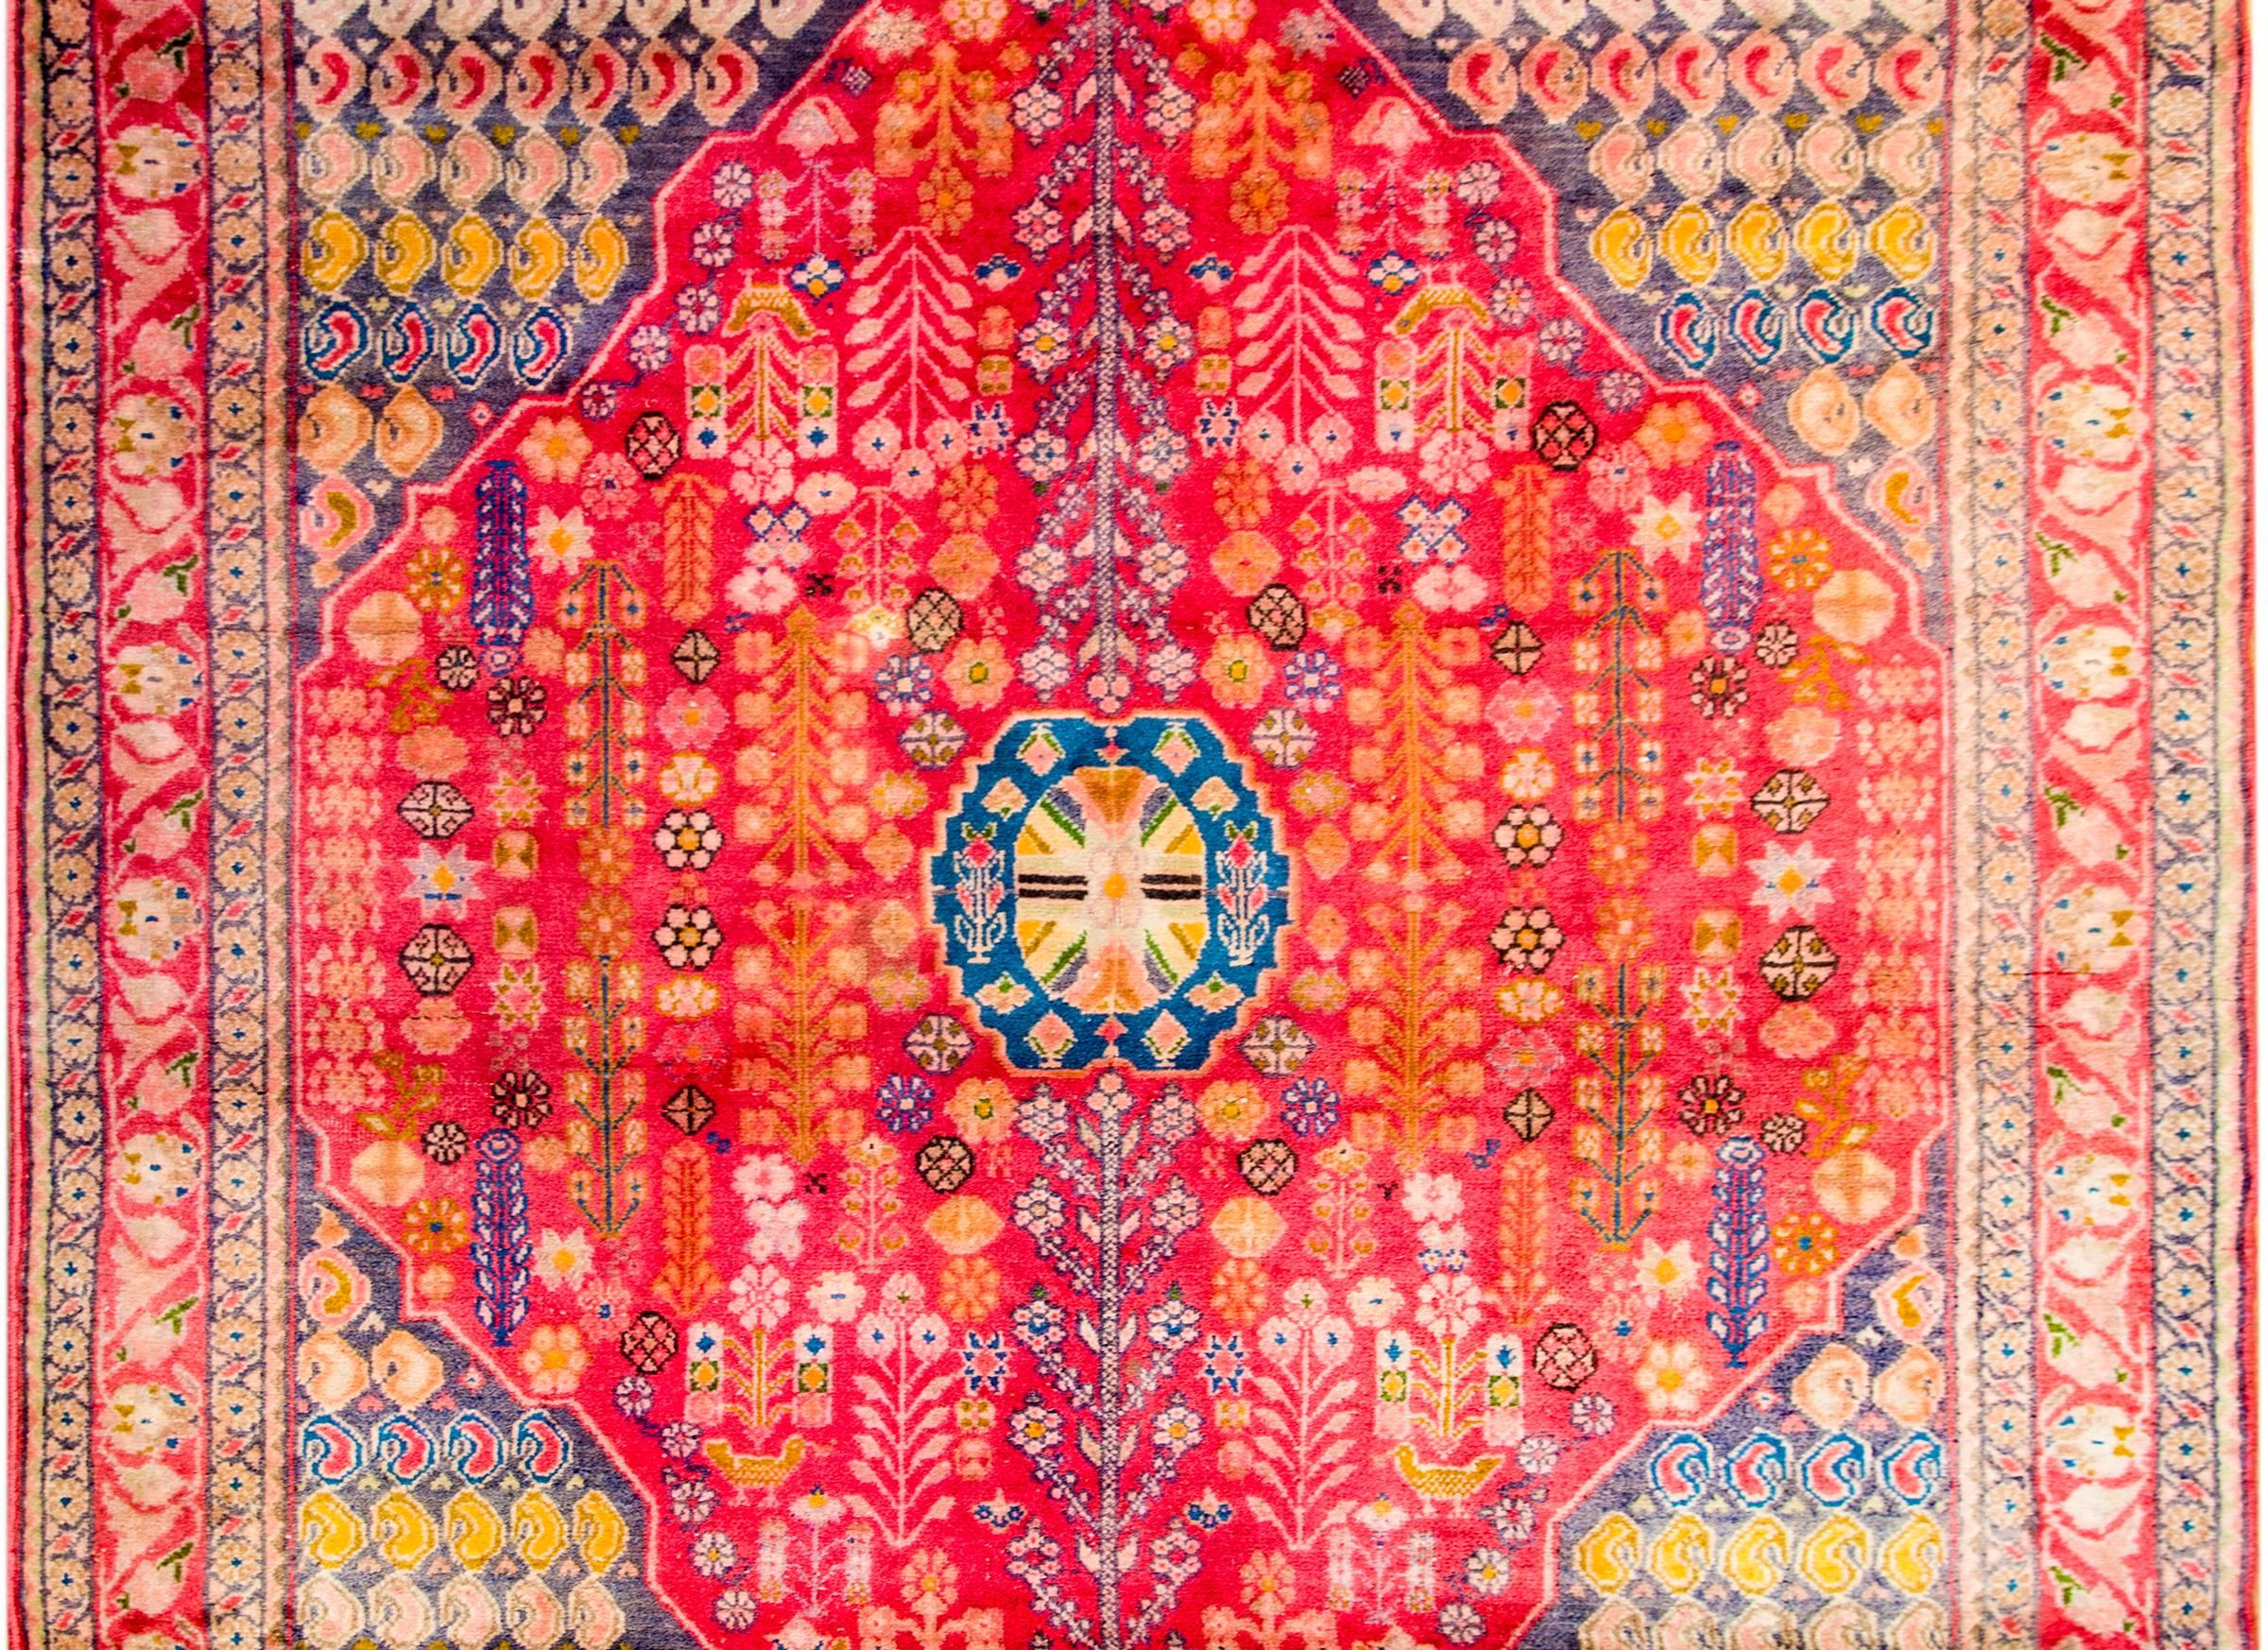 Wonderful mid-20th century Persian Arak rug with a fantastic central diamond medallion woven with myriad trees-of-life on a bright crimsons background. The diamond medallion lives amidst an interesting field os multicolored paisleys, surrounded by a